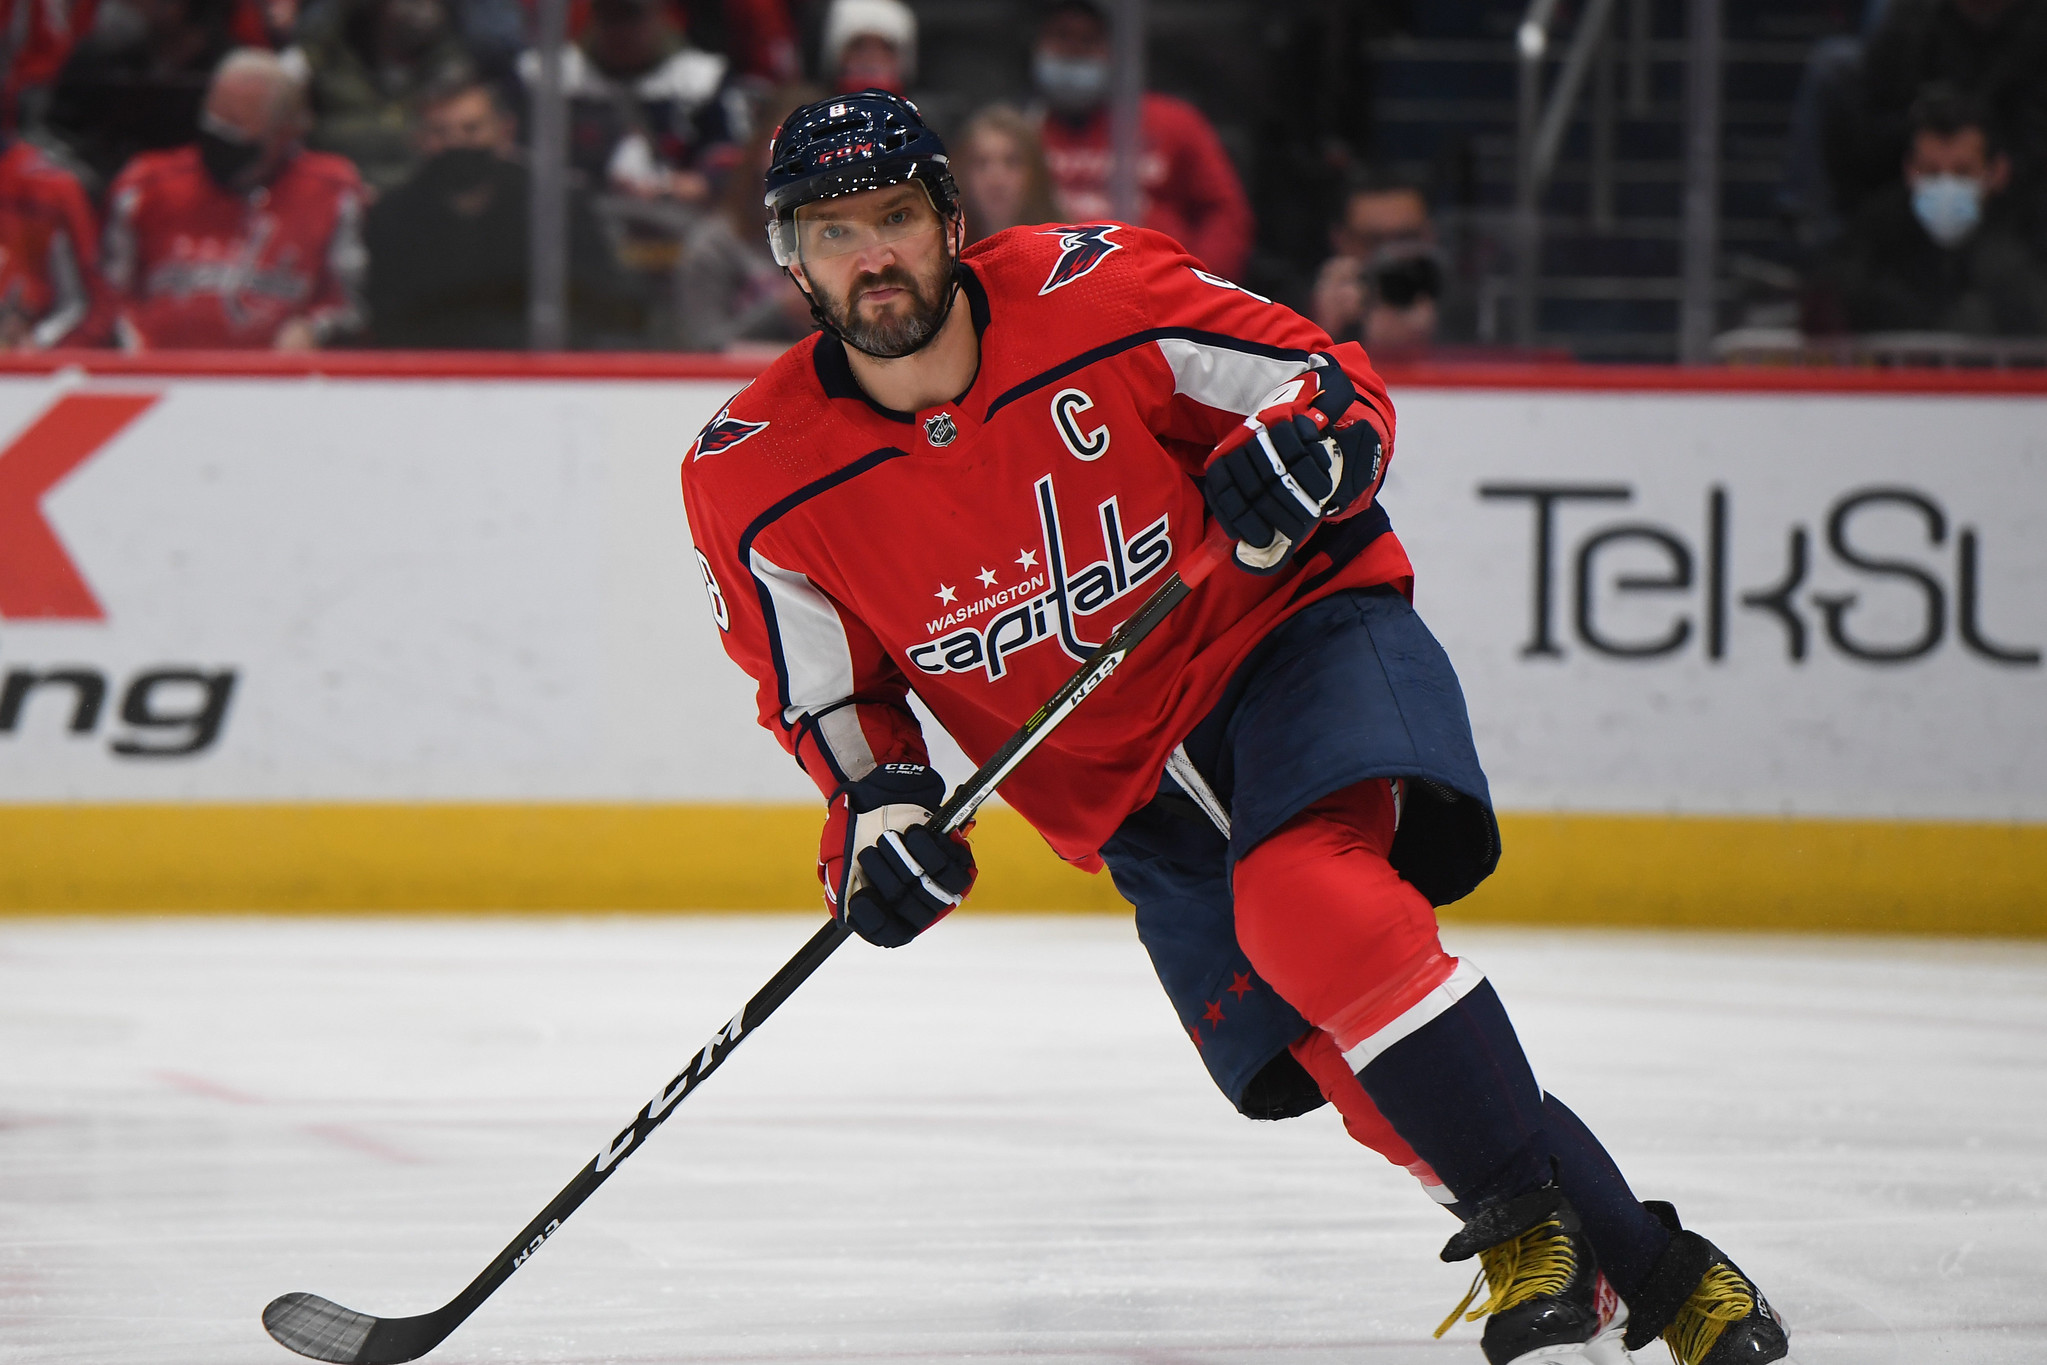 Alex Ovechkin passes Gordie Howe for No. 2 on NHL's all-time goals